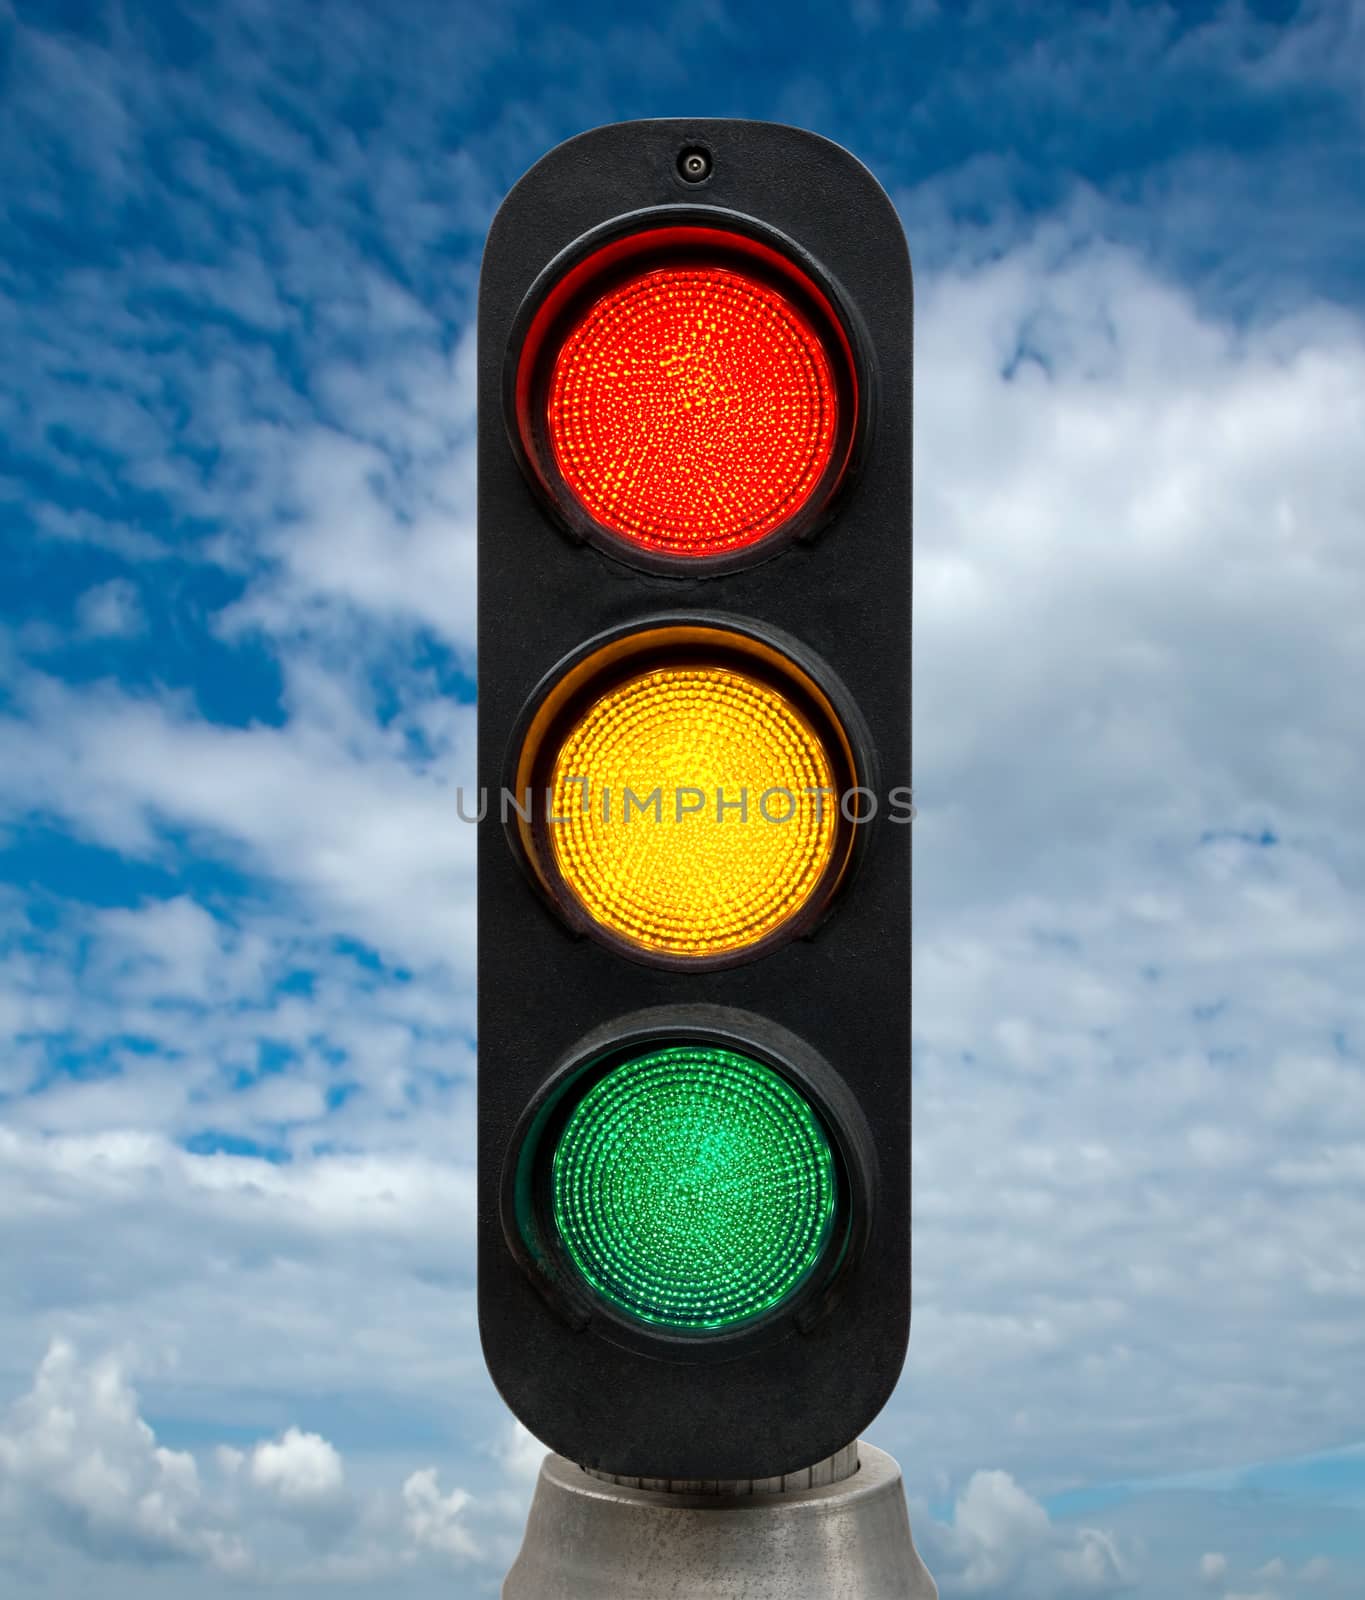 Red Yellow and Green traffic lights against blue sky backgrounds. Clipping Path included.